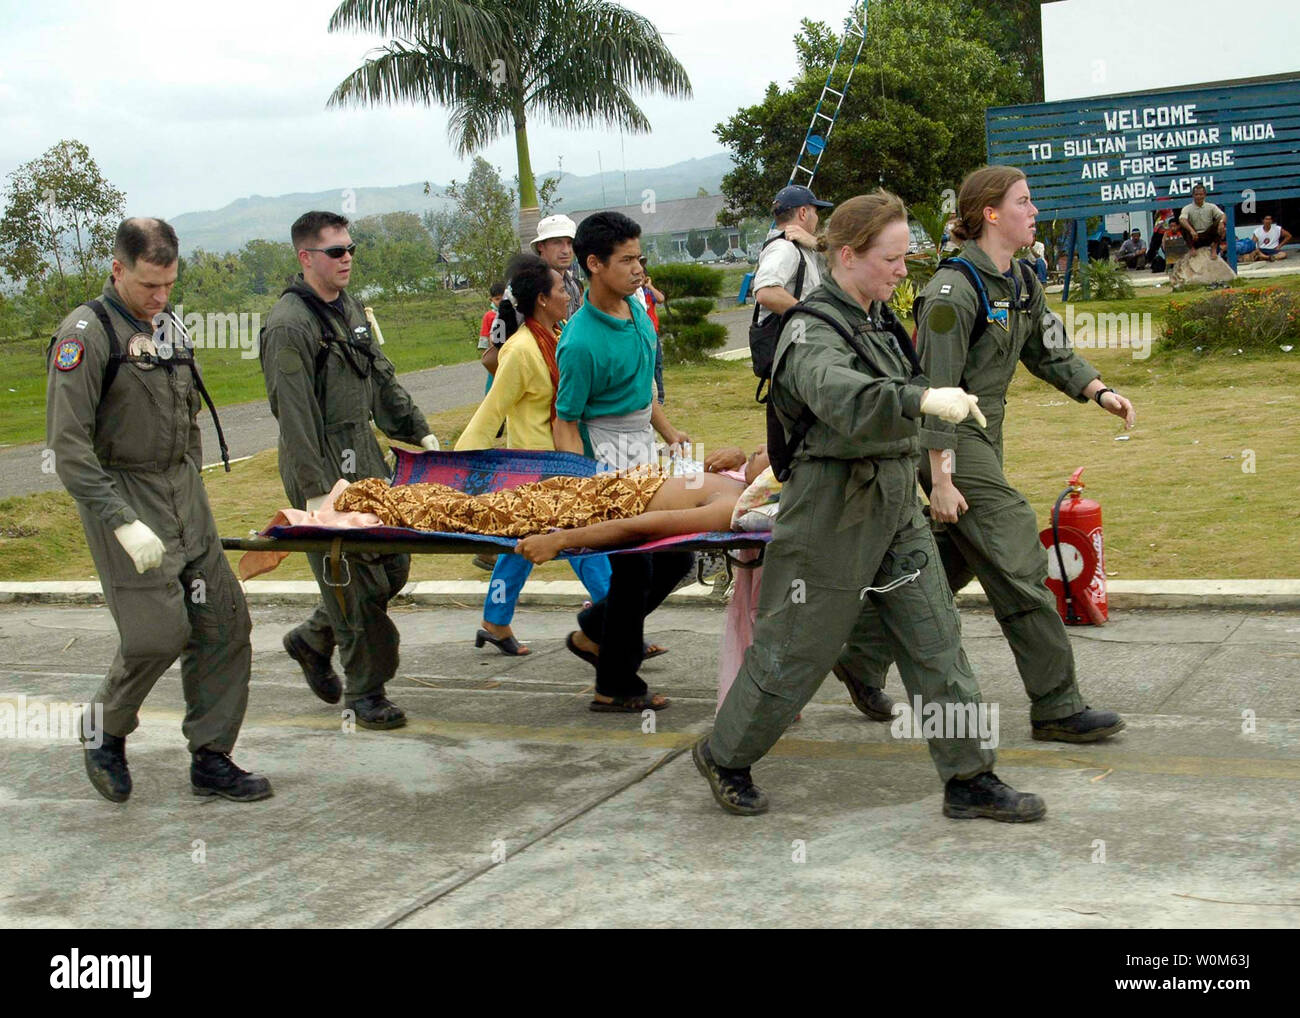 From left, Lt. Mark Banks, Chief Hospital Corpsman Jim Jones, Hospital Corpsman 1st Class Rebecca McClung, and Lt. Lisa Peterson, carry a patient on a stretcher flown-in by a U.S. Navy helicopter to a temporary triage site in Aceh, Sumatra on January 2, 2005.Medical teams from USS Abraham Lincoln (CVN 72), Carrier Air Wing Two (CVW-2) and the International Organization for Migration (IOM) set-up a triage site located on Sultan Iskandar Muda Air Force Base, in Banda Aceh, Sumatra. The two teams worked together with members of the Australian Air Force to provide initial medical care to victims o Stock Photo